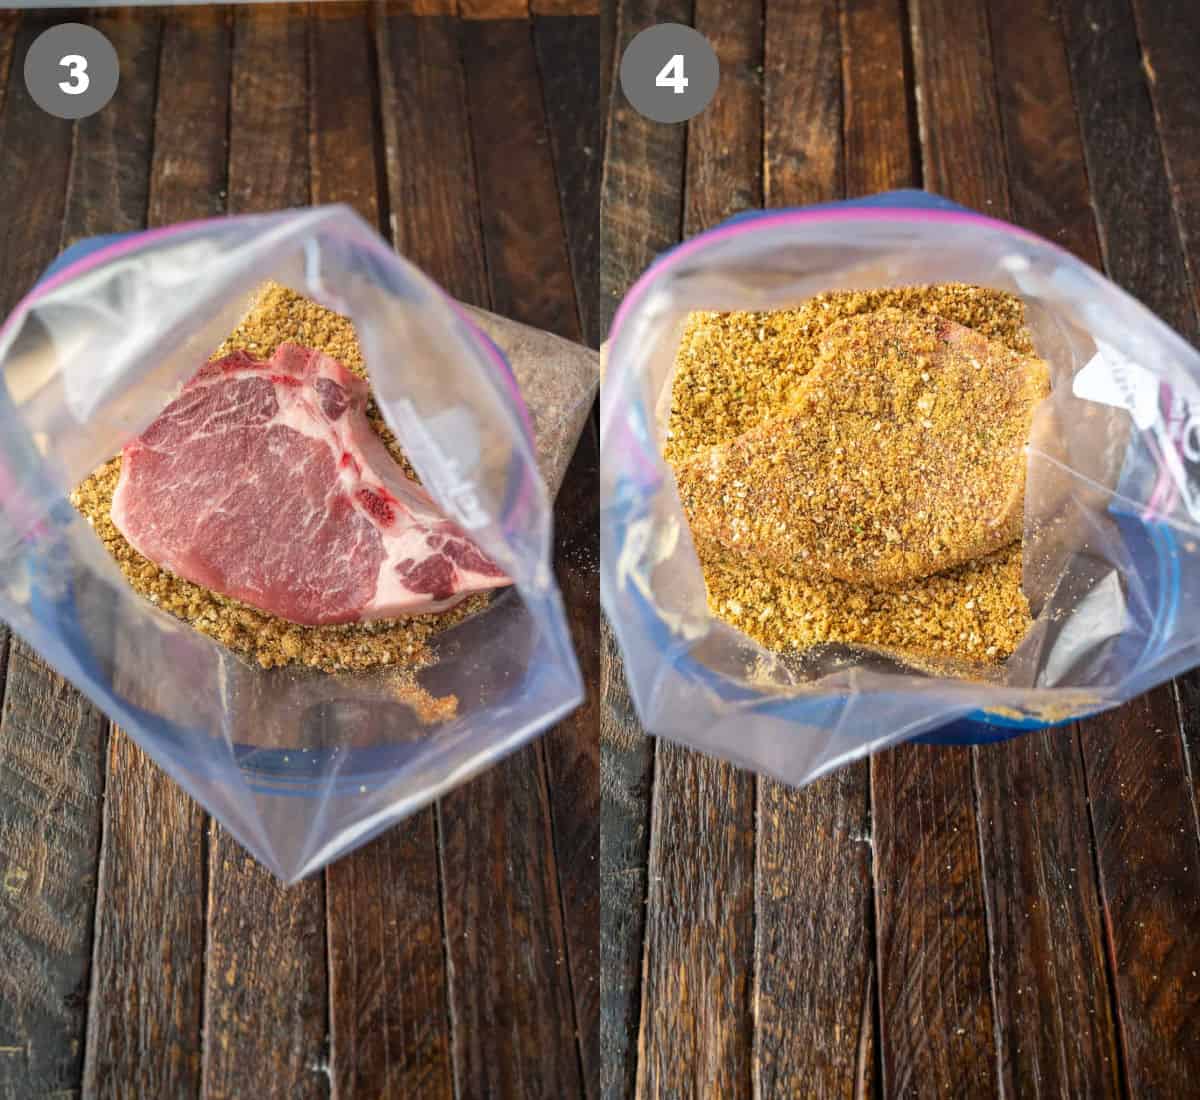 A pork chop placed in the bag with sesonings and shook until covered.